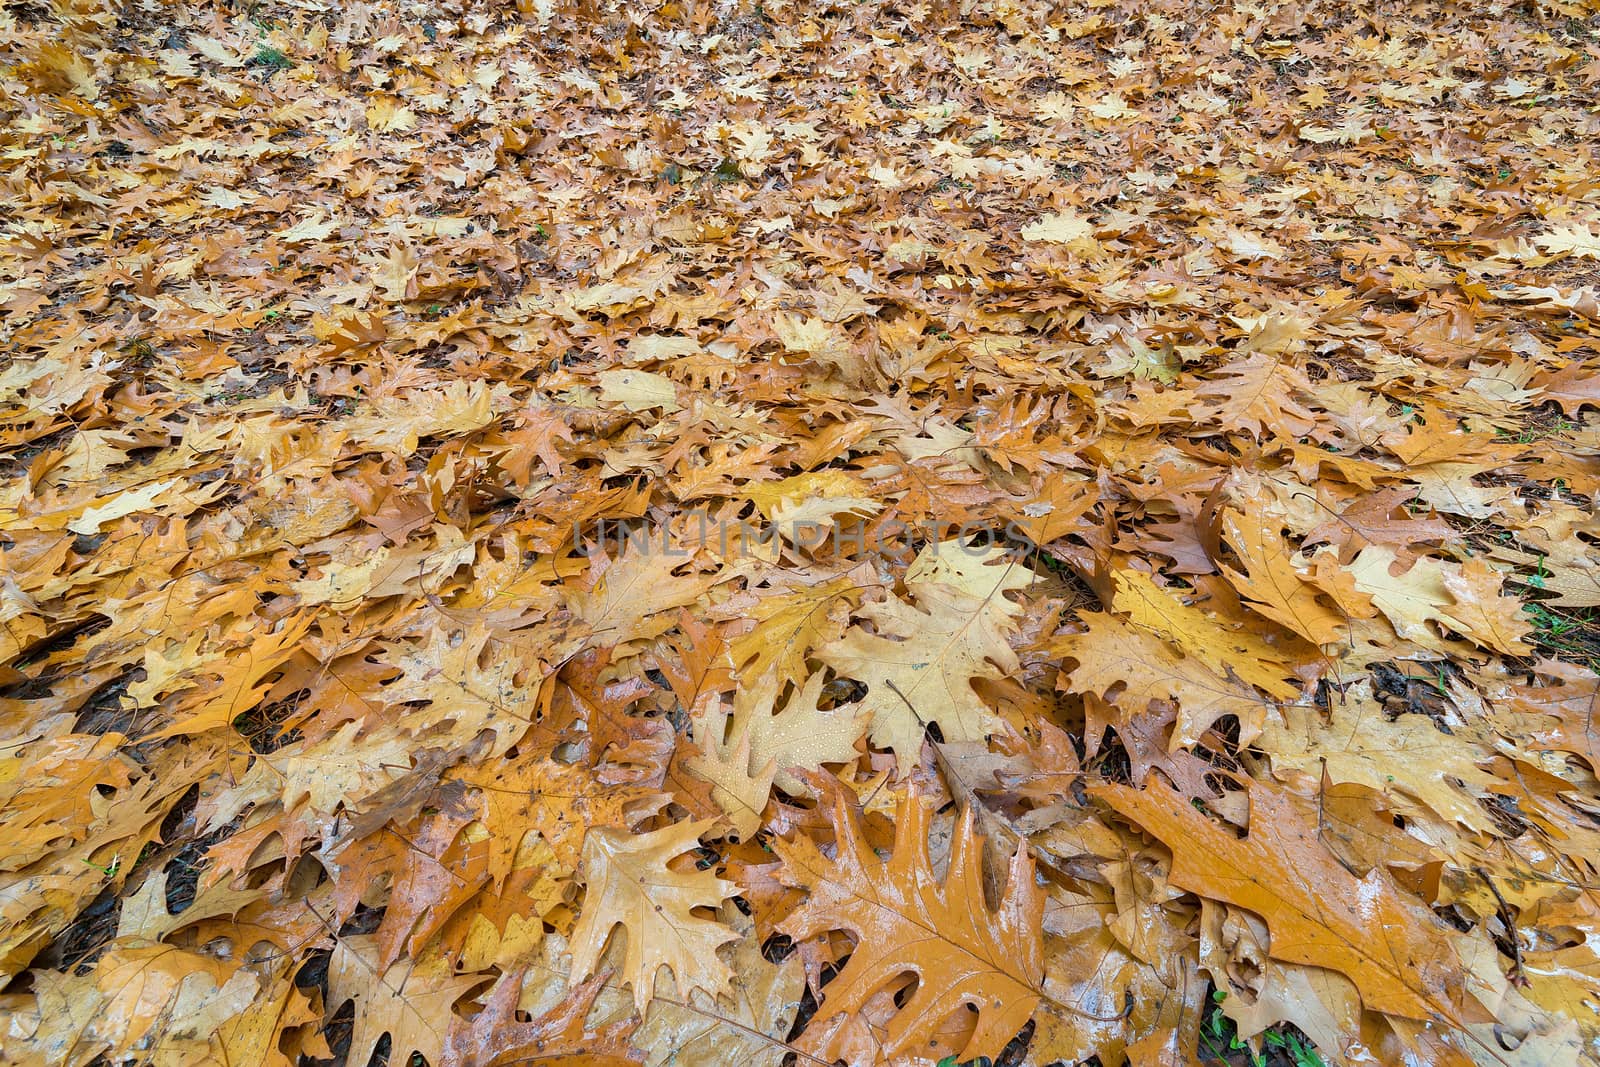 Oak Leaves on the Ground in Autumn by jpldesigns